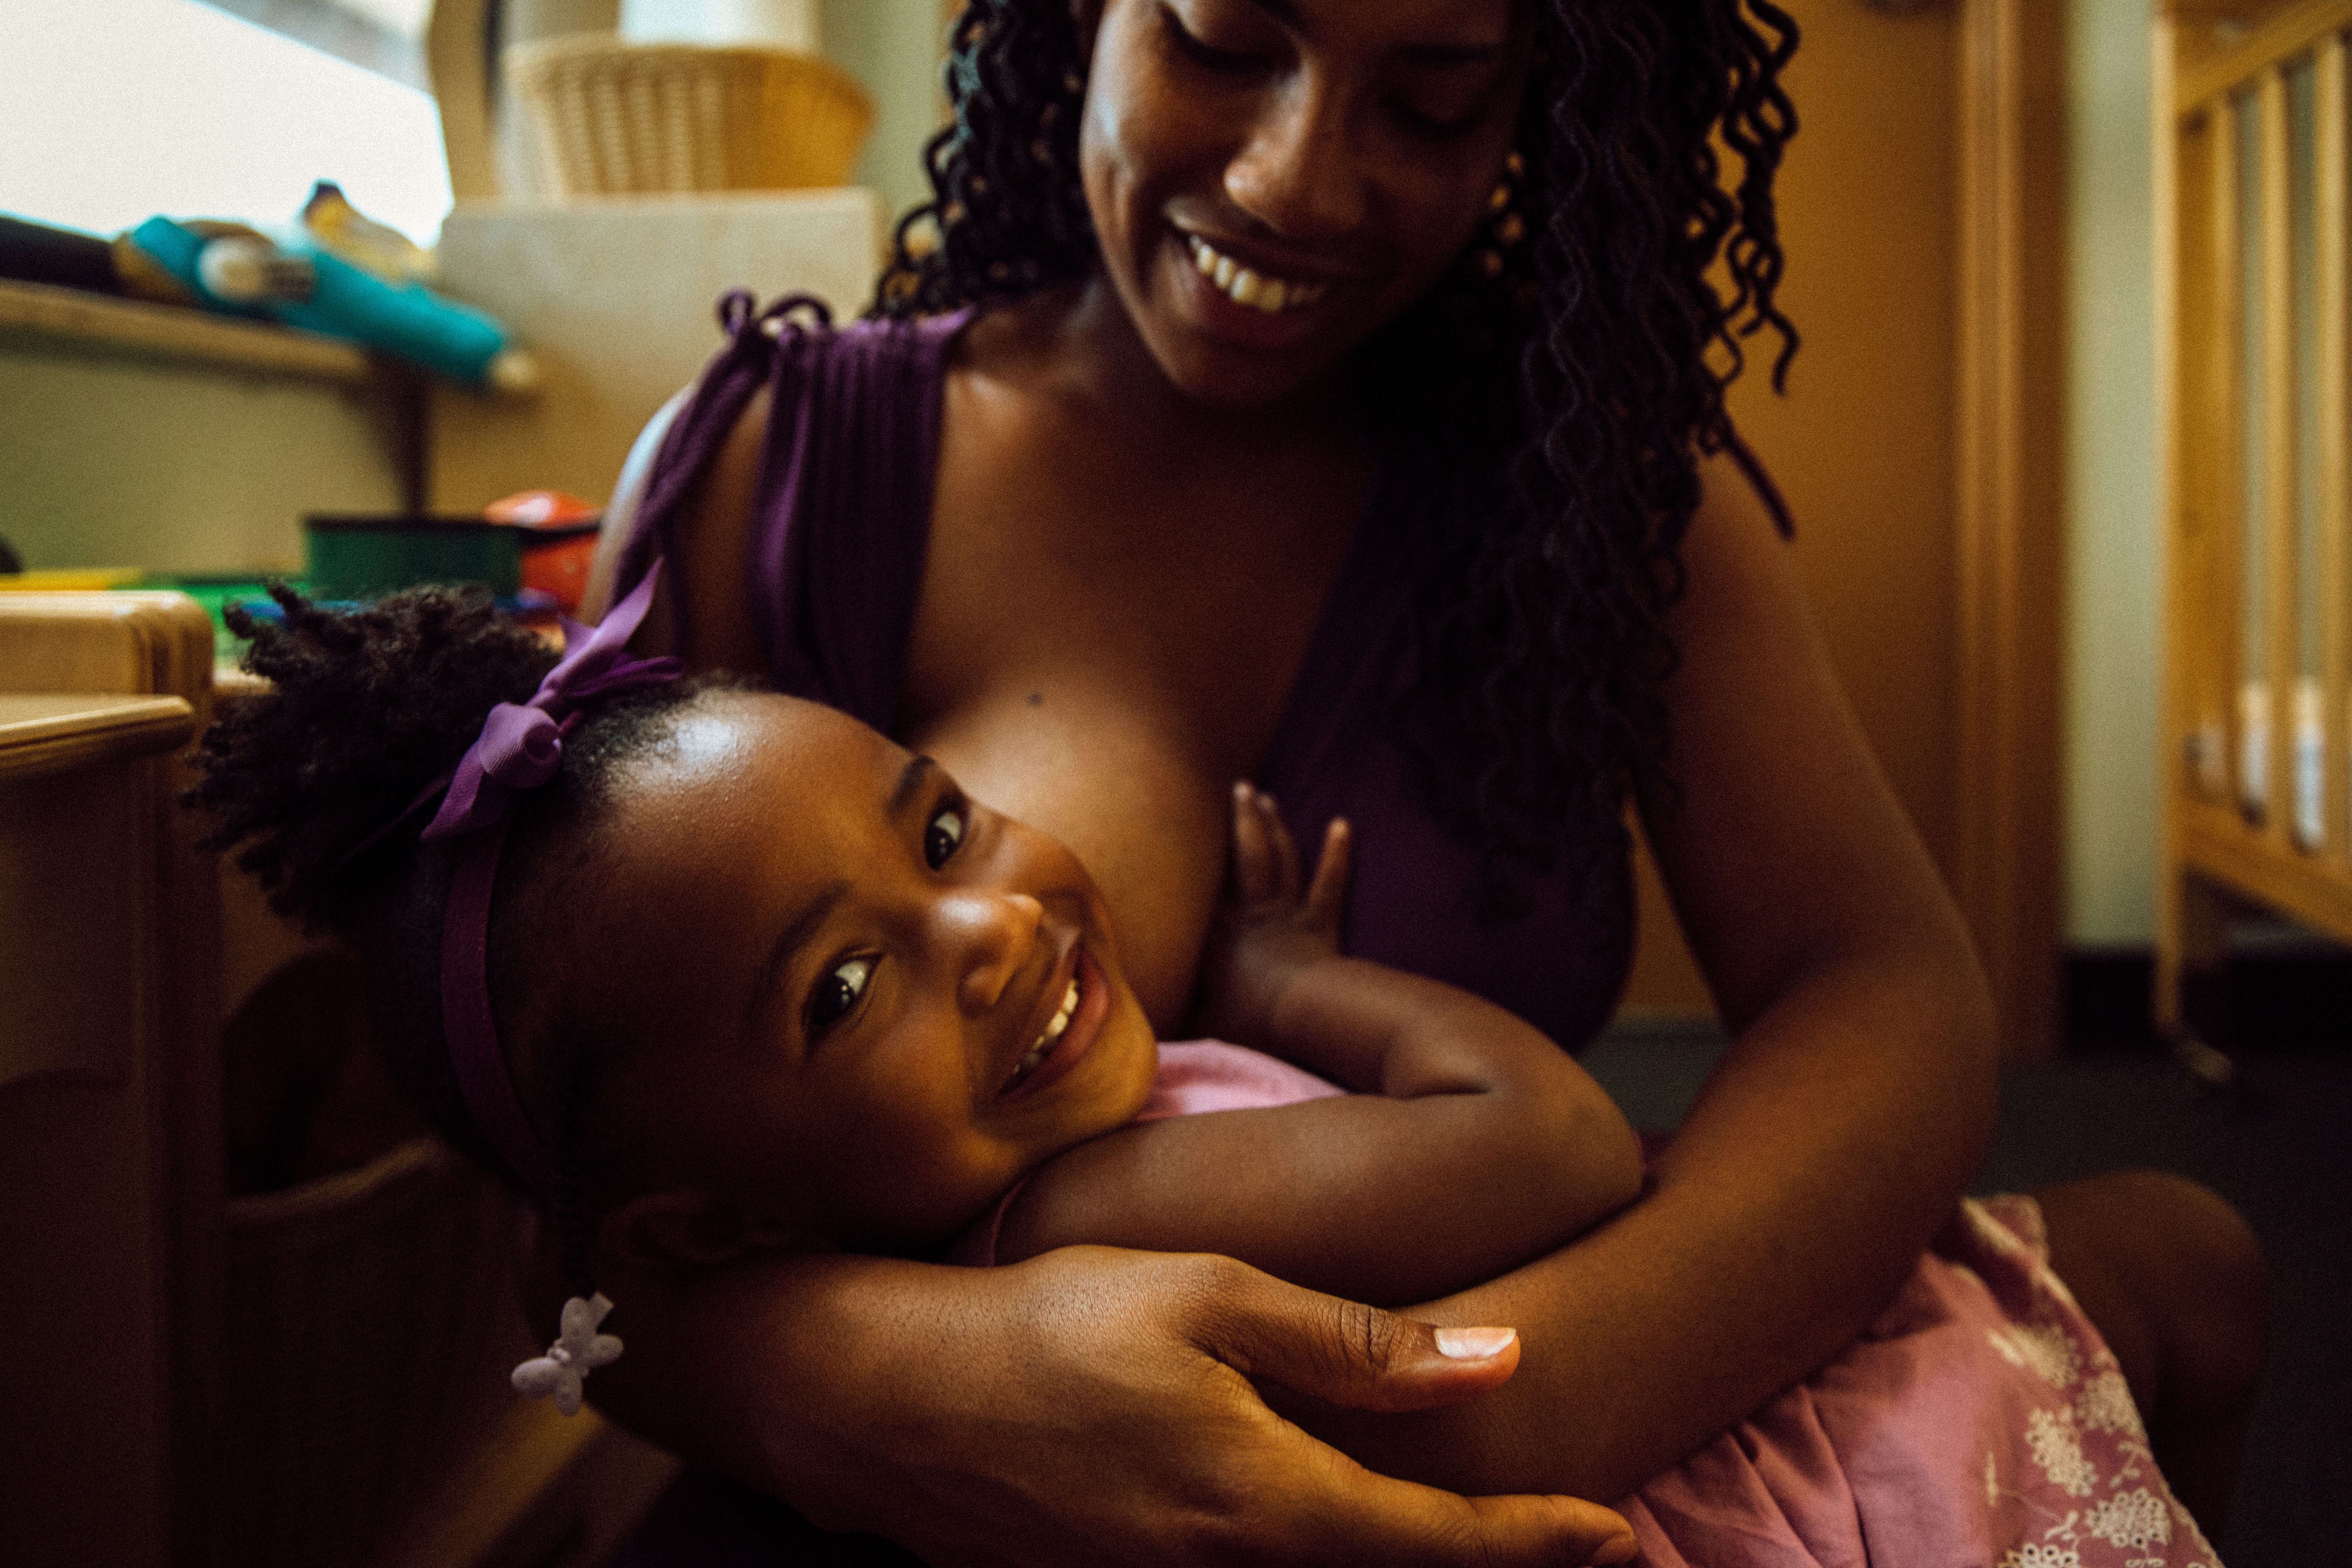 Victoria Washington holds her daughter on her lap to breastfeed. Her daughter looks back and smiles at the camera.